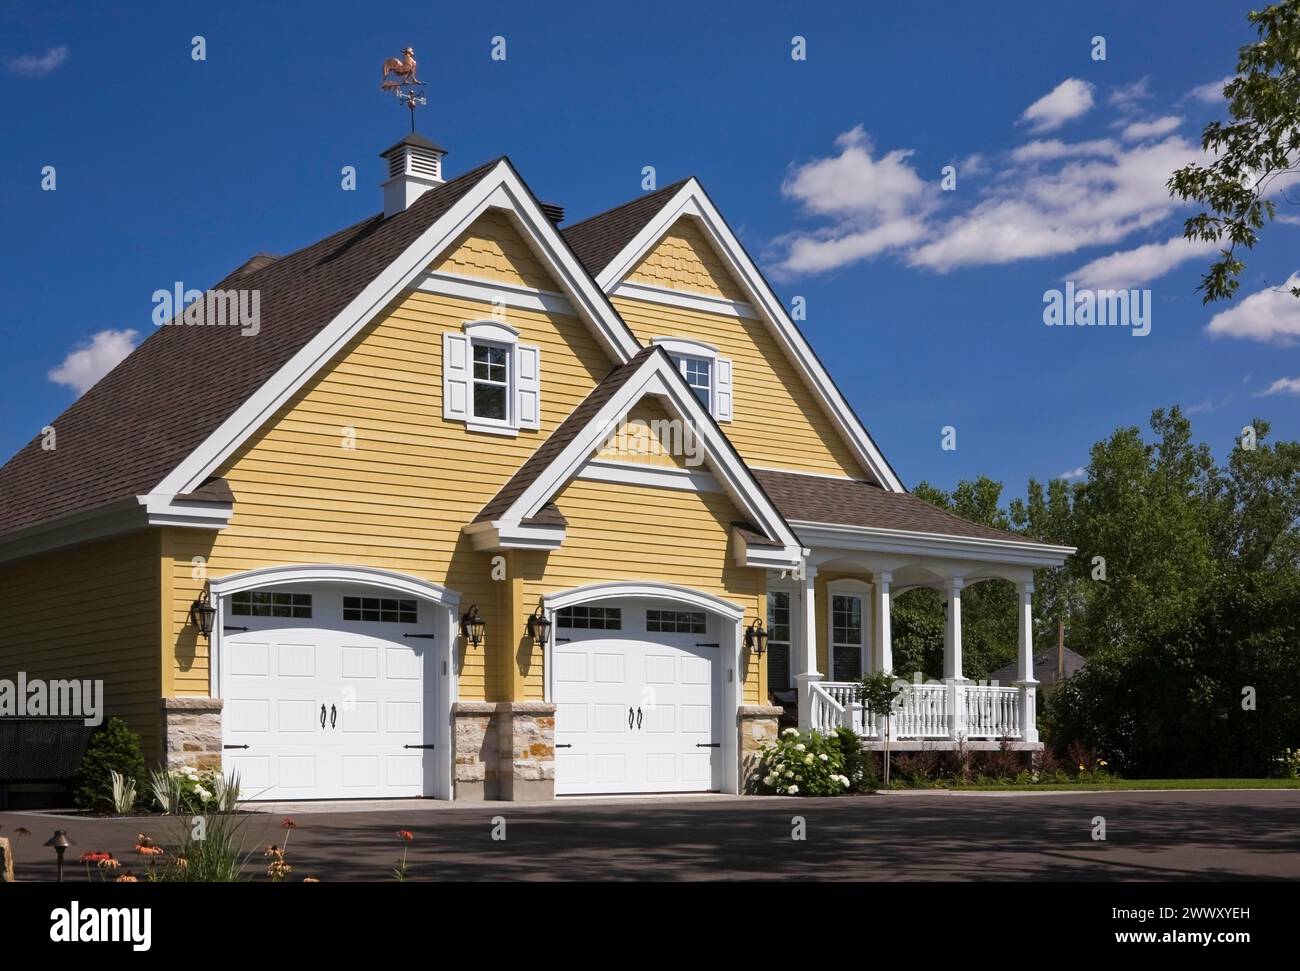 Yellow and white trim contemporary country house with two car garage, landscaped front yard and black asphalt driveway in summer, Quebec, Canada Stock Photo